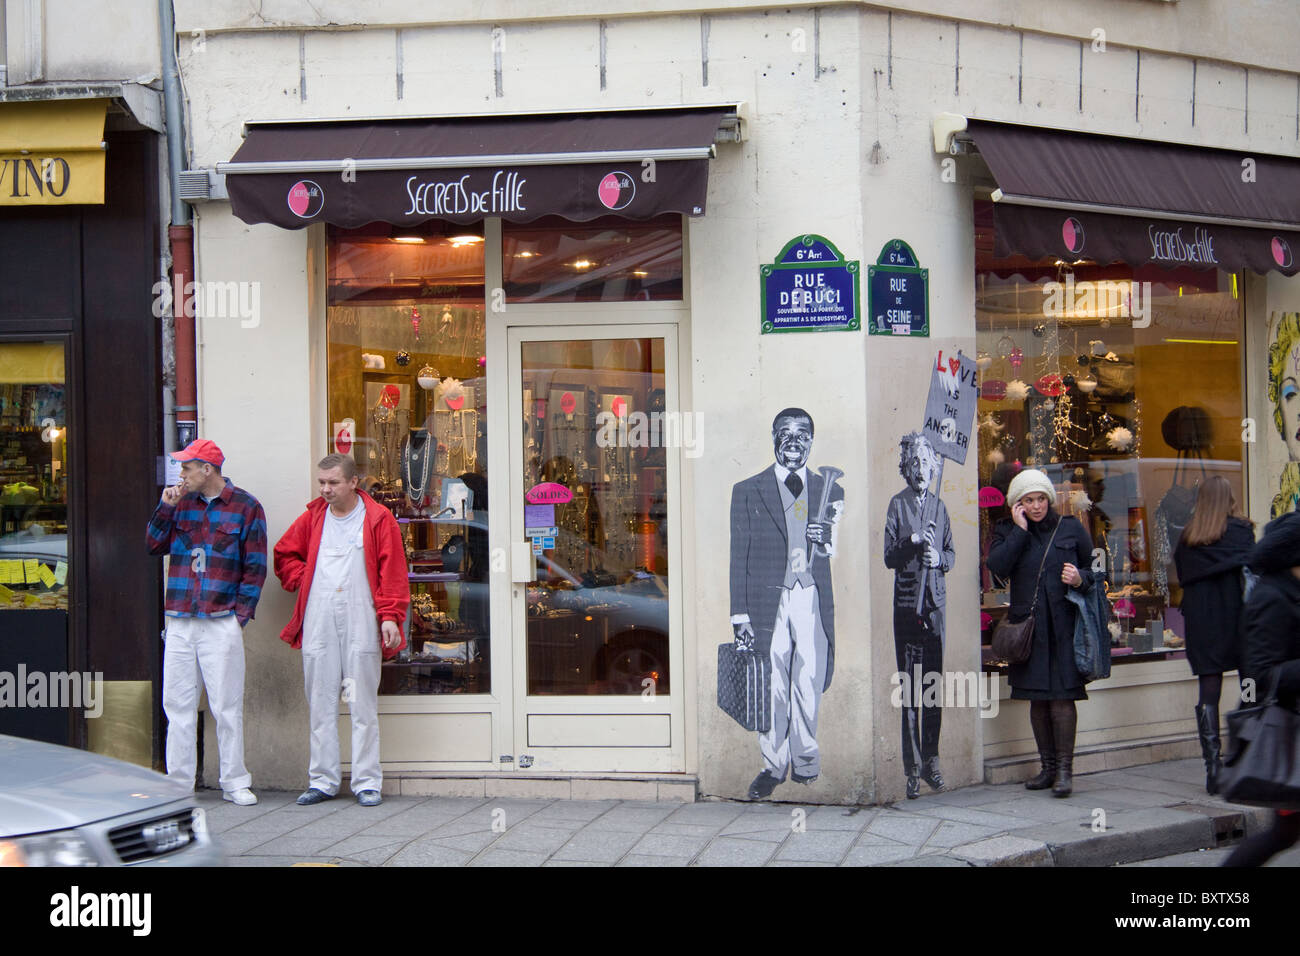 Murals of Louis Armstrong (Satchmo) and Albert Einstein on the wall of a shop in Paris Stock Photo